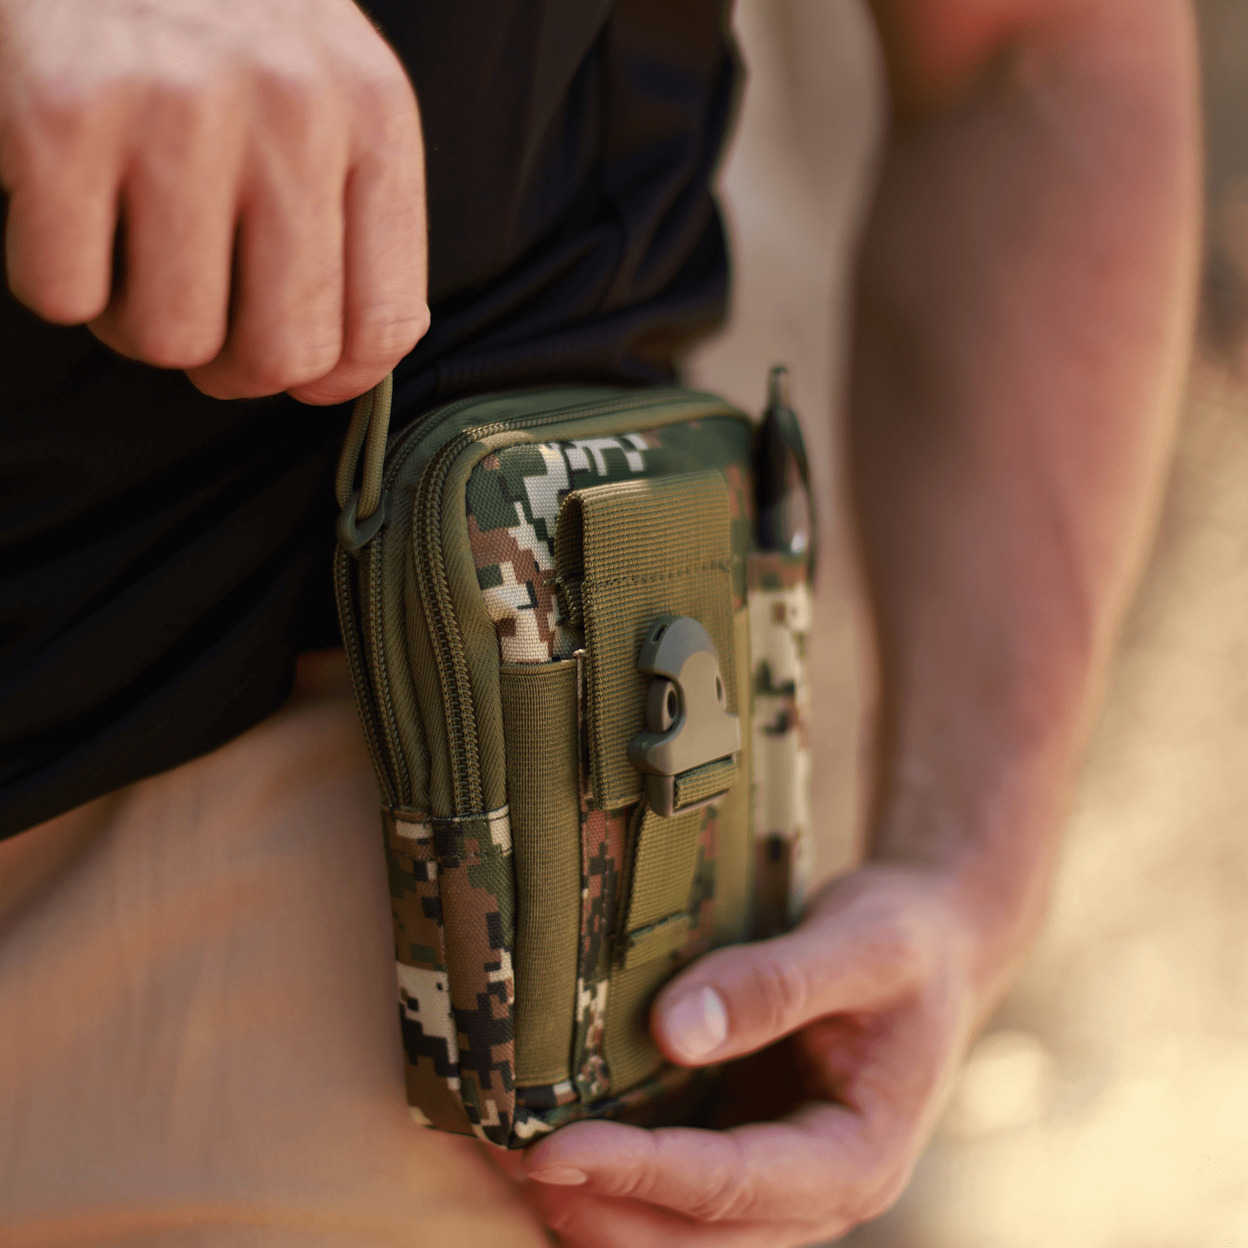 Tactical MOLLE Pouch & Waist Bag For Hiking & Outdoor Activities - BDU Digital